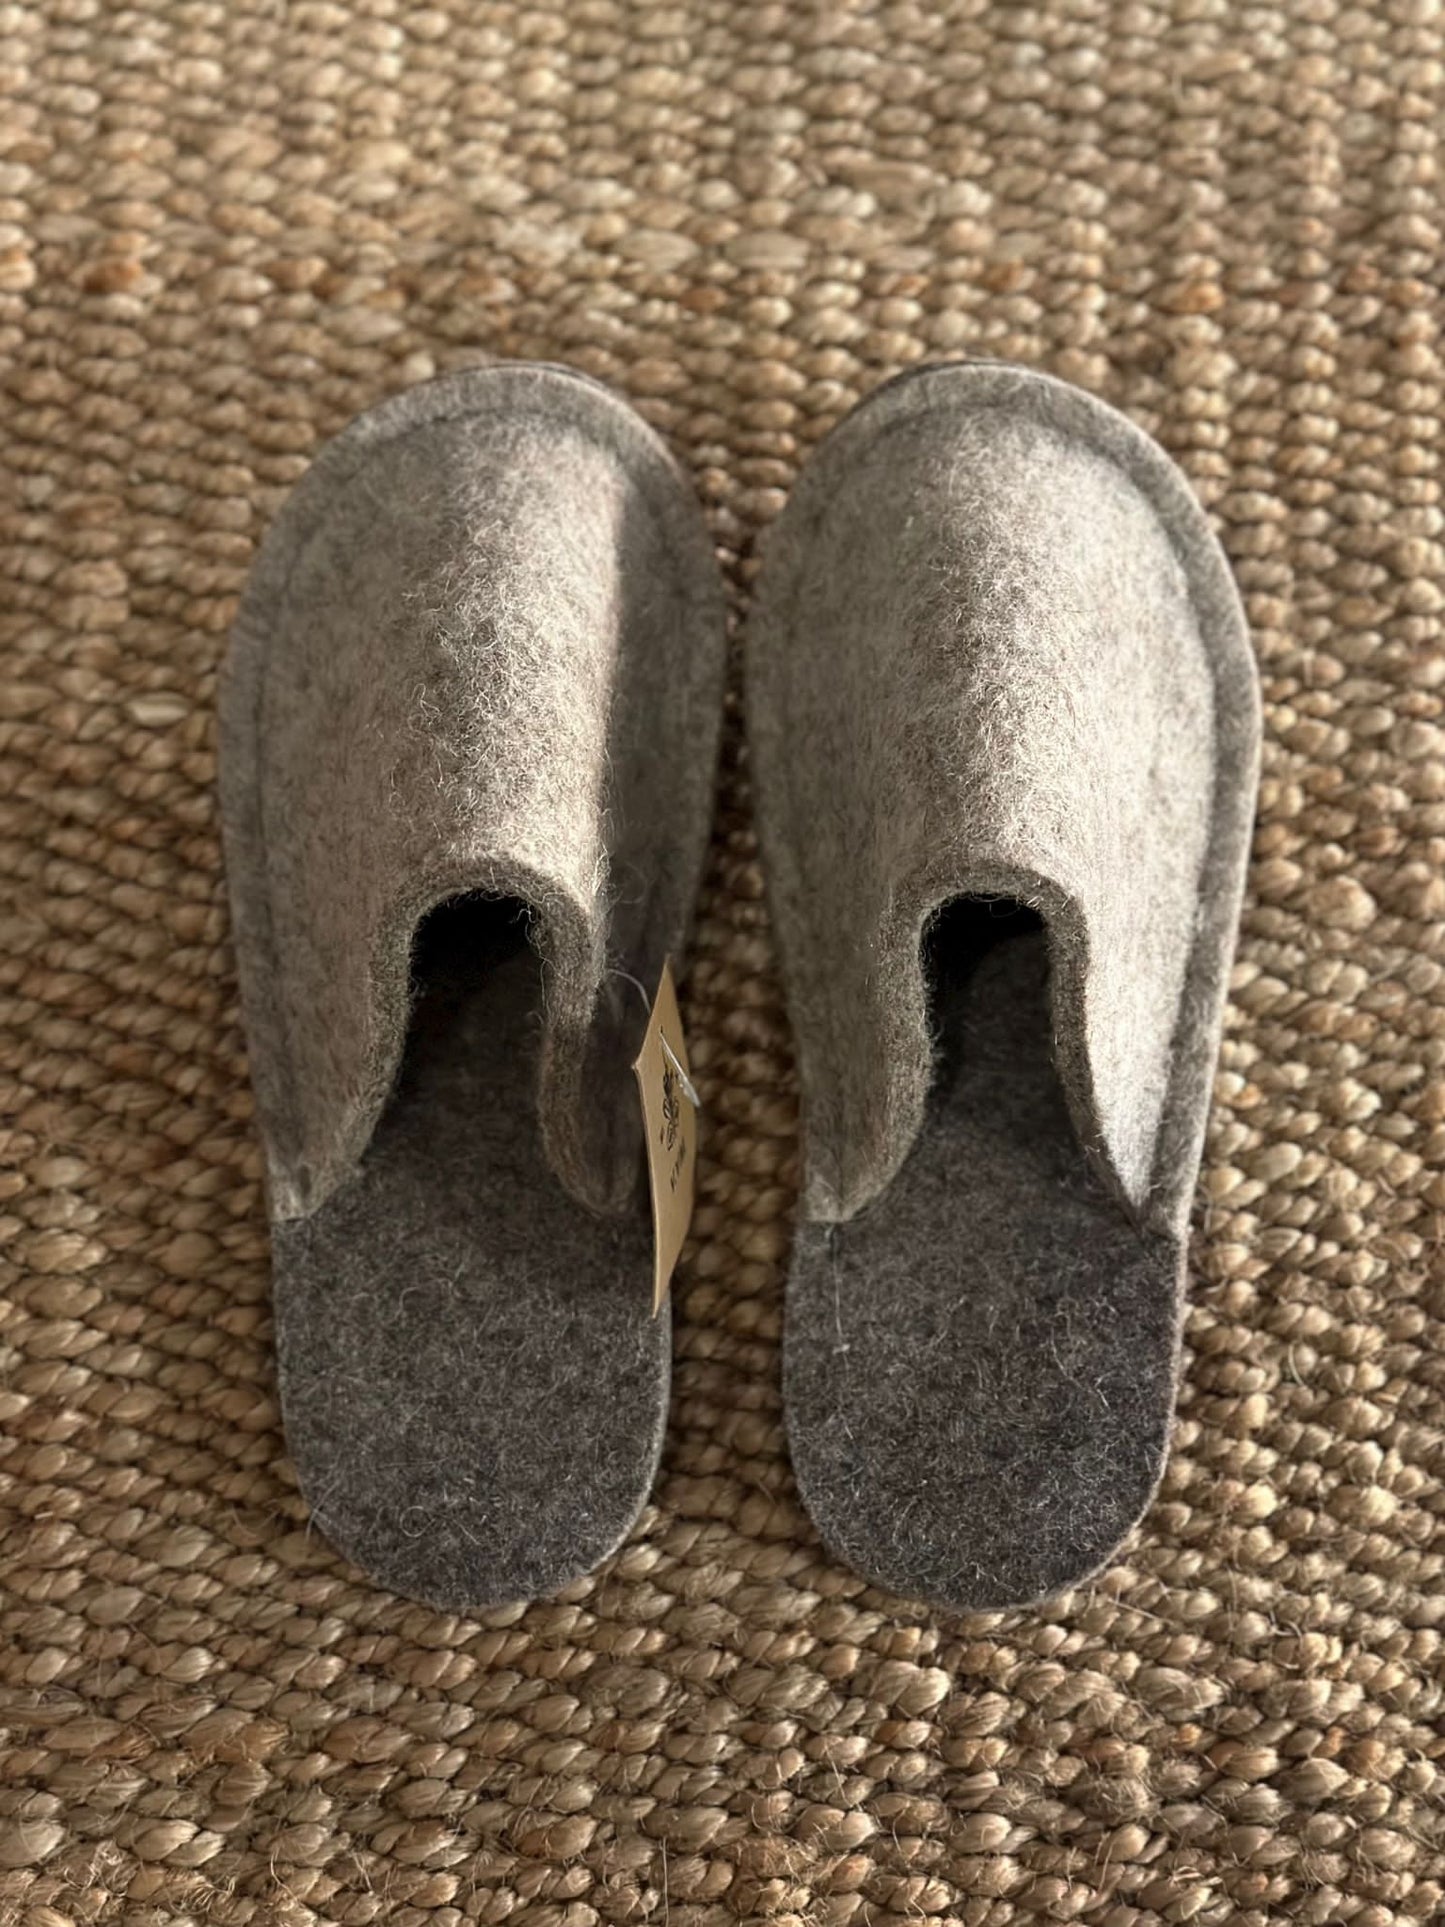 Wool Slippers - The Guest Slipper